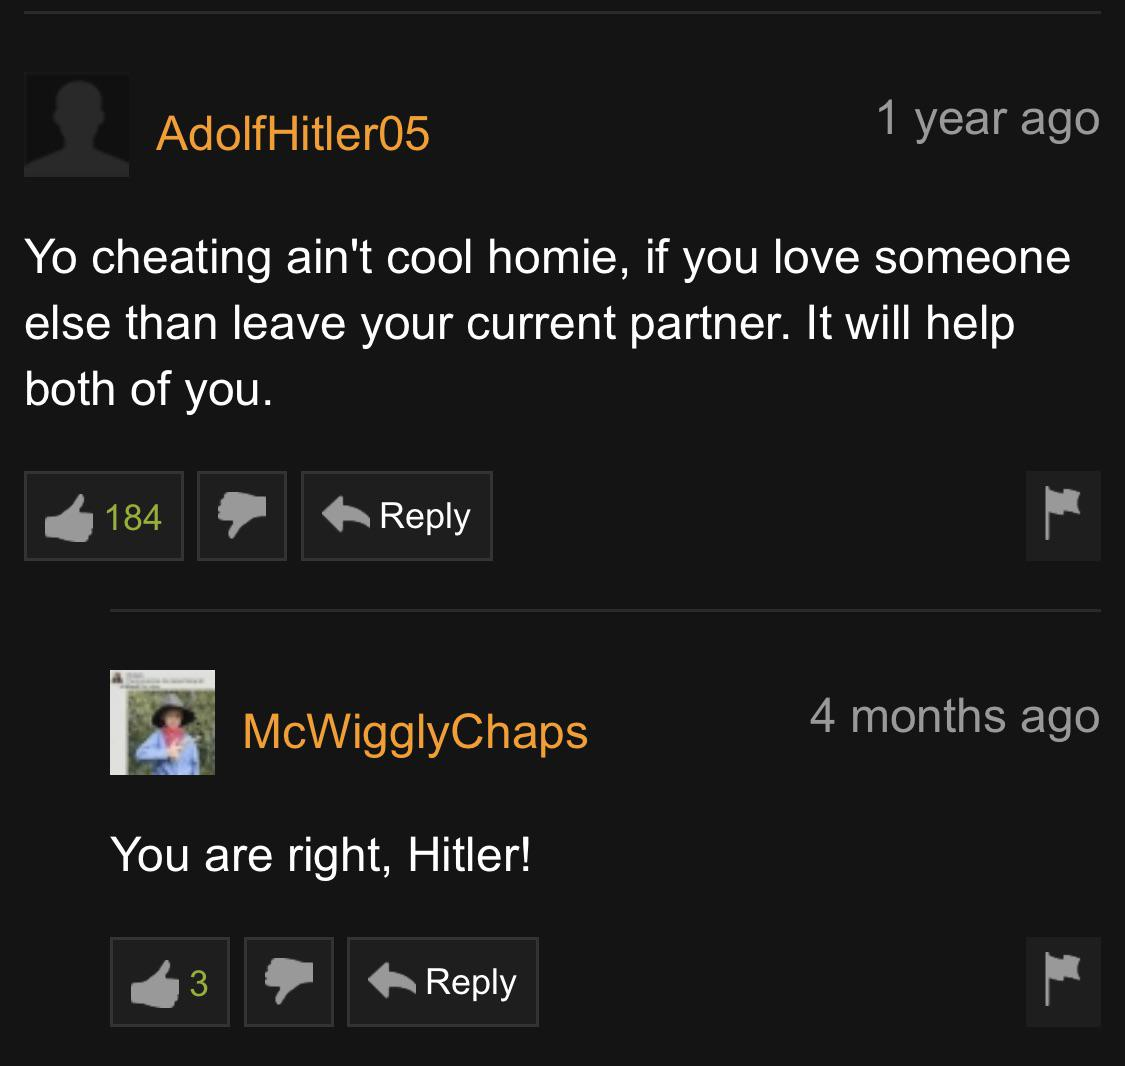 screenshot - AdolfHitler05 1 year ago Yo cheating ain't cool homie, if you love someone else than leave your current partner. It will help both of you. 3 184 McWigglyChaps 4 months ago You are right, Hitler!